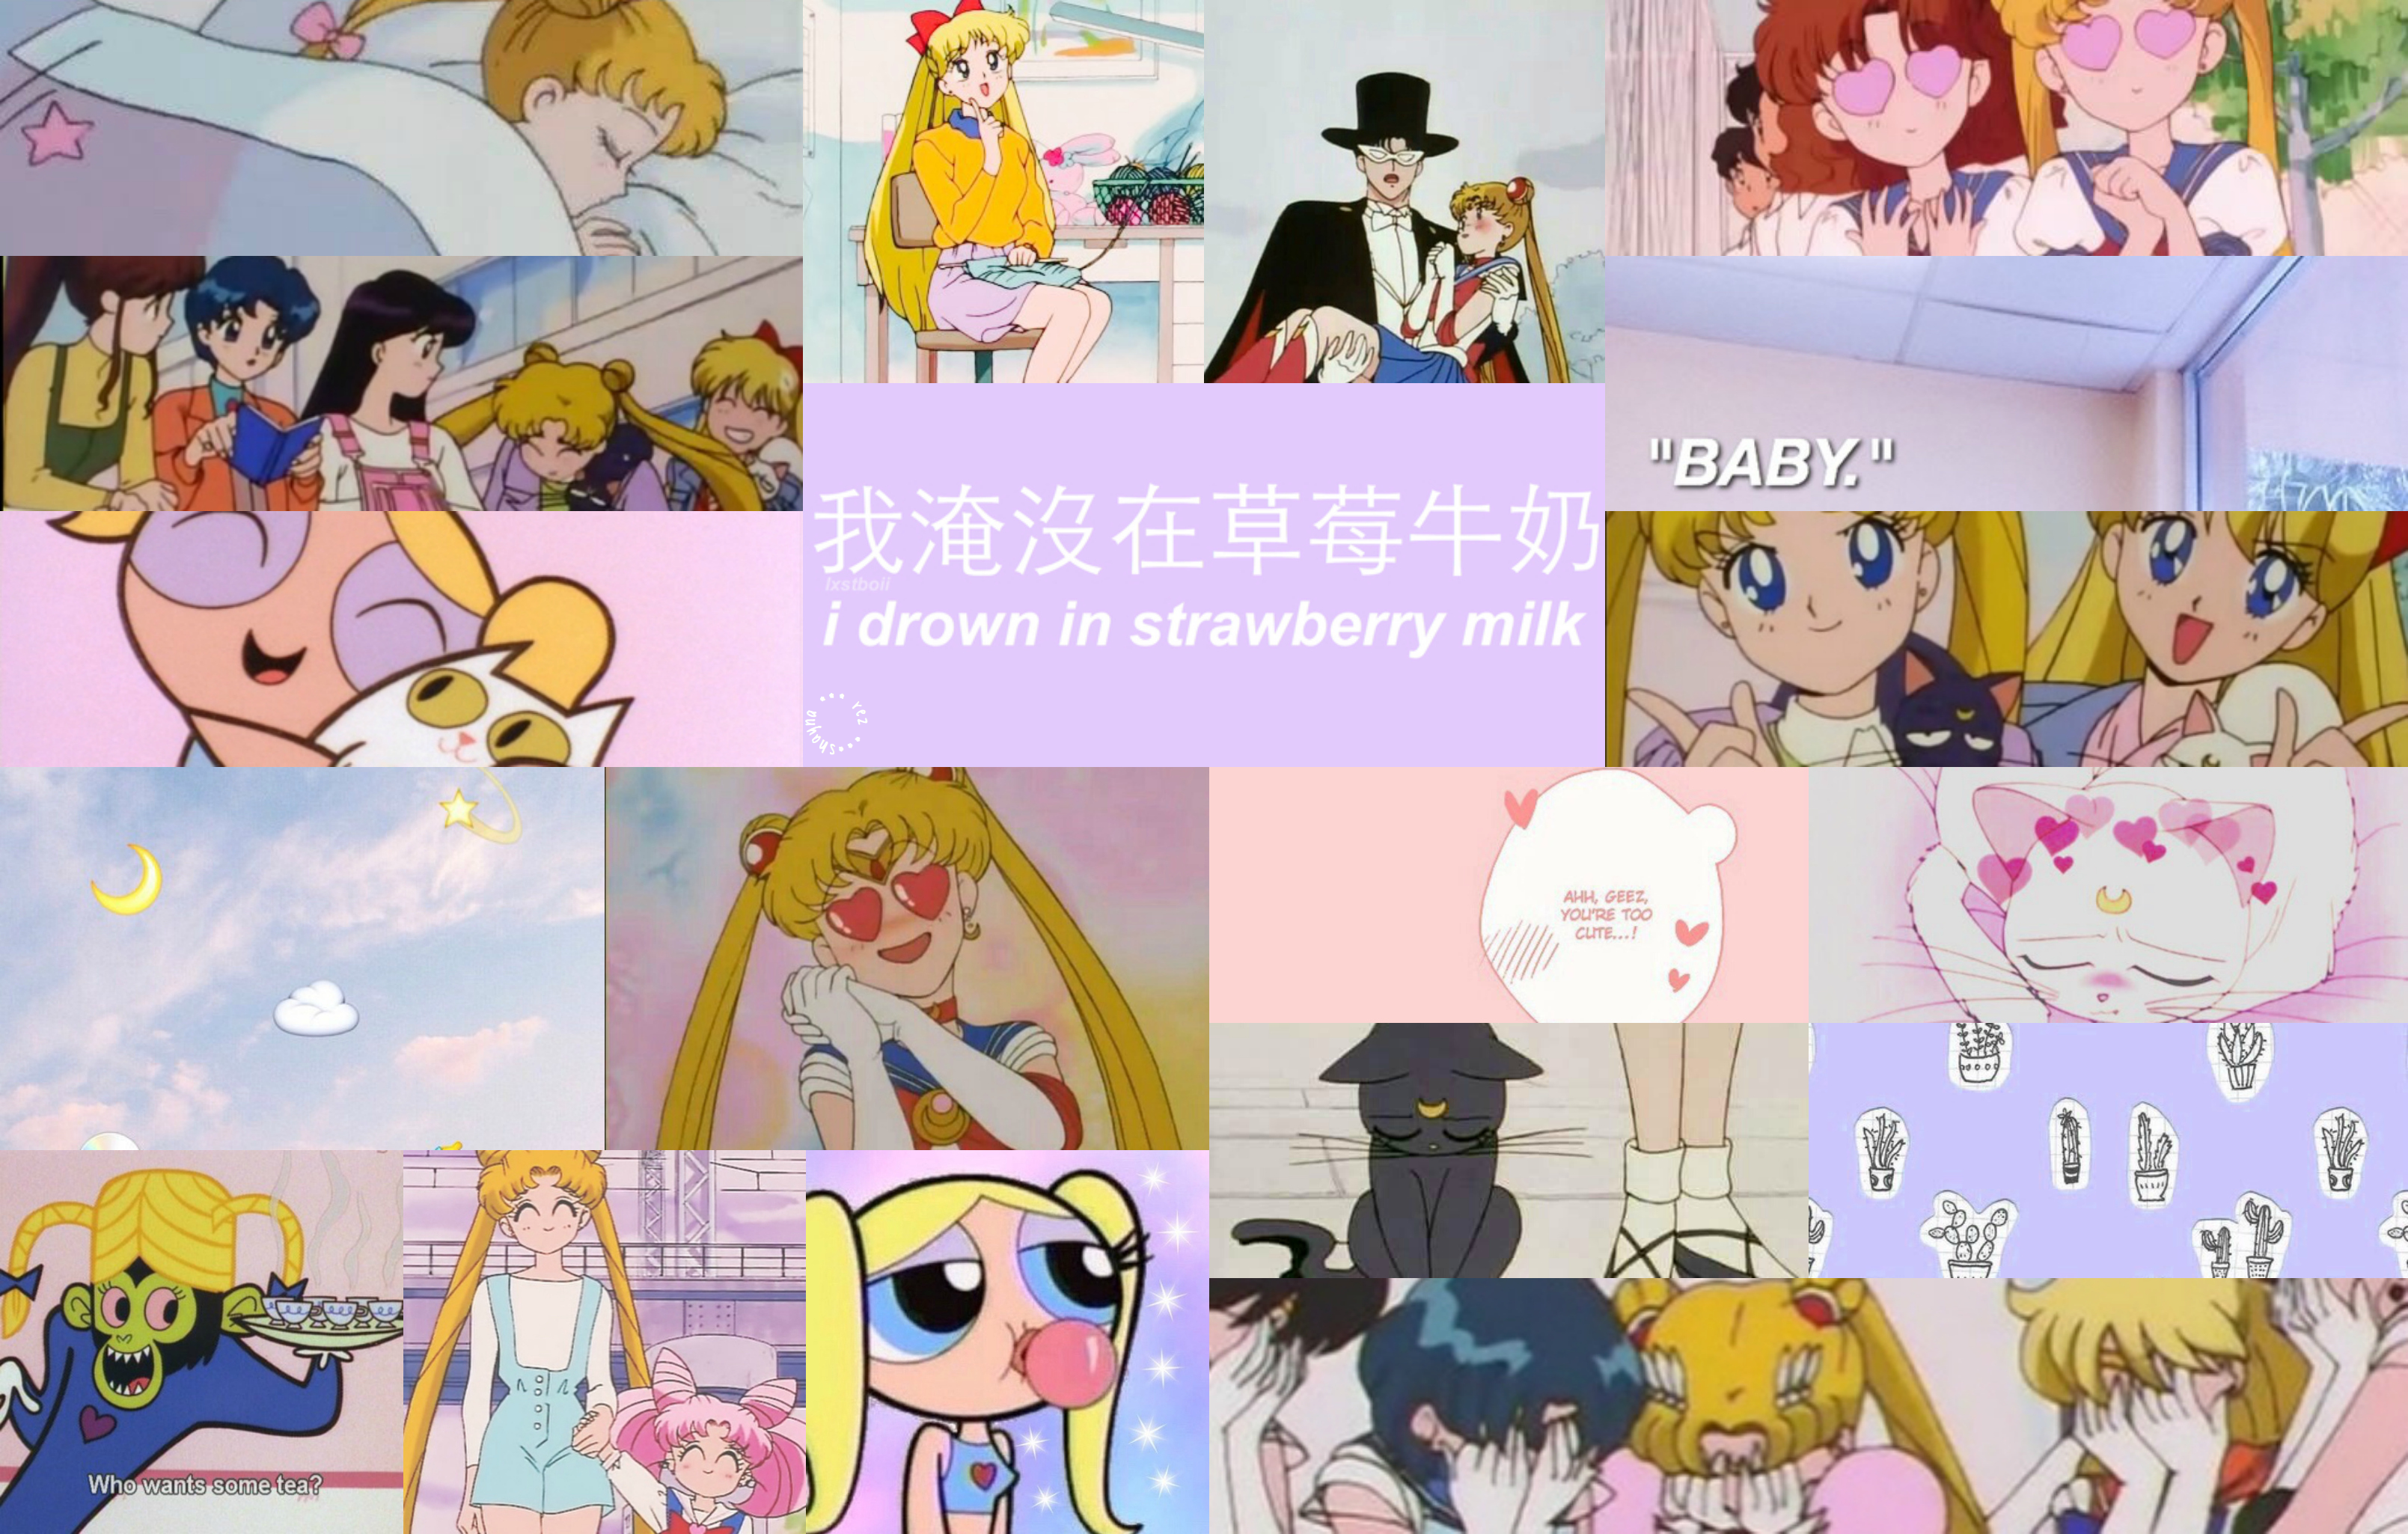 sailor moon anime aesthetic collage for a laptop wallpaper #aesthetic collage wallpaper lapto. Sailor moon wallpaper, Cute laptop wallpaper, Sailor moon aesthetic